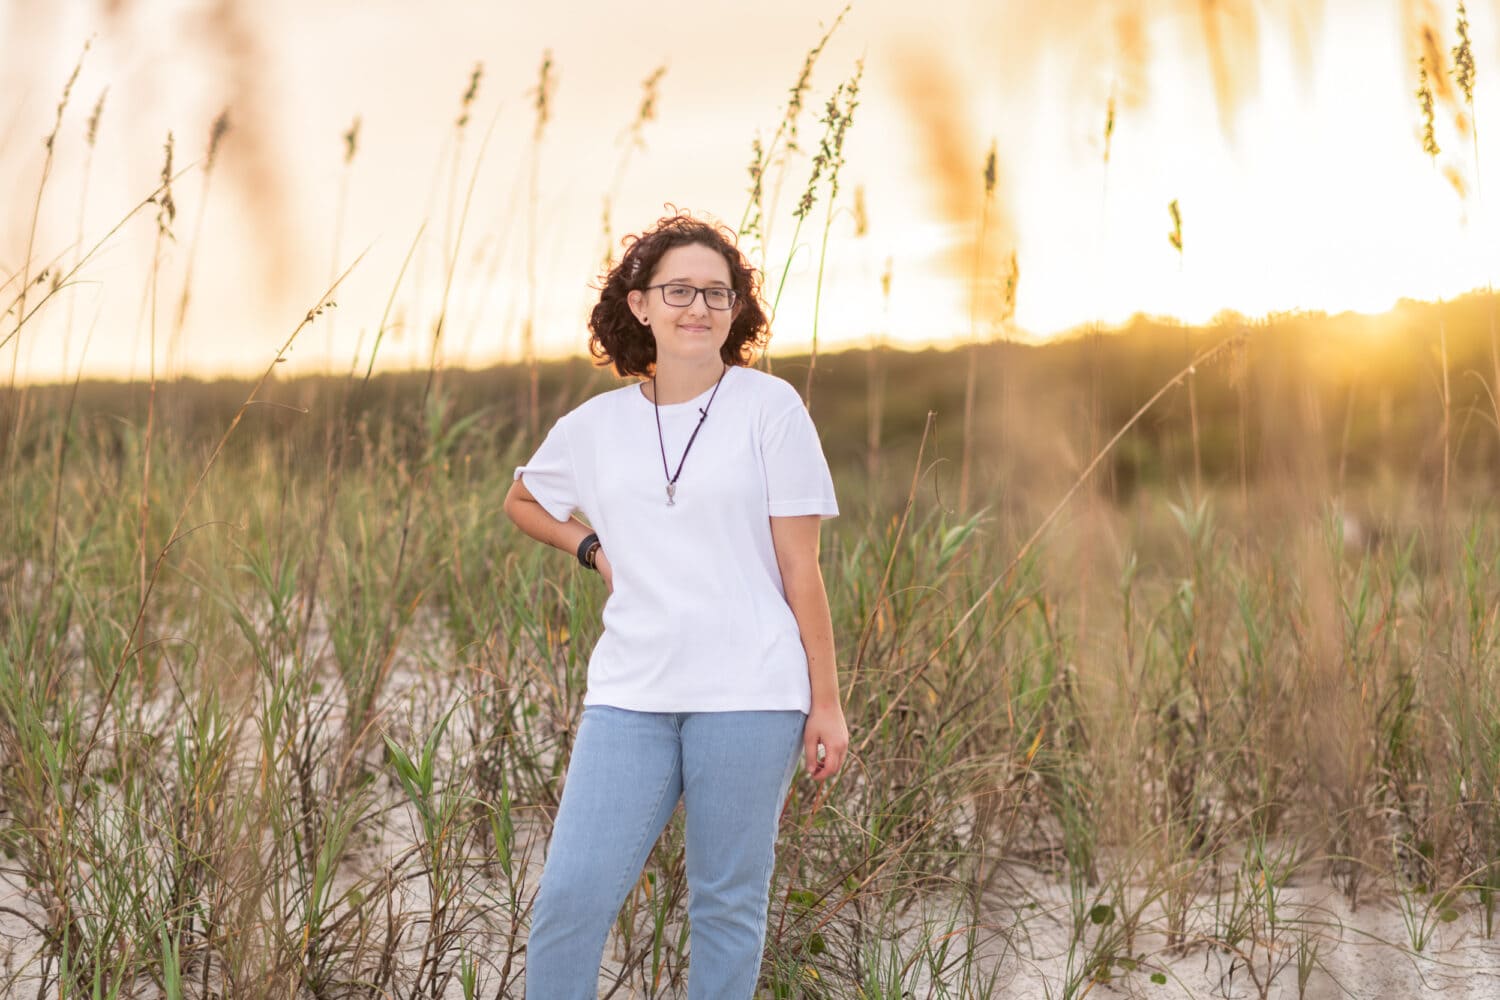 Senior portraits by the ocean and Atalaya Castle for an artist with her canvas and paints - Huntington Beach State Park